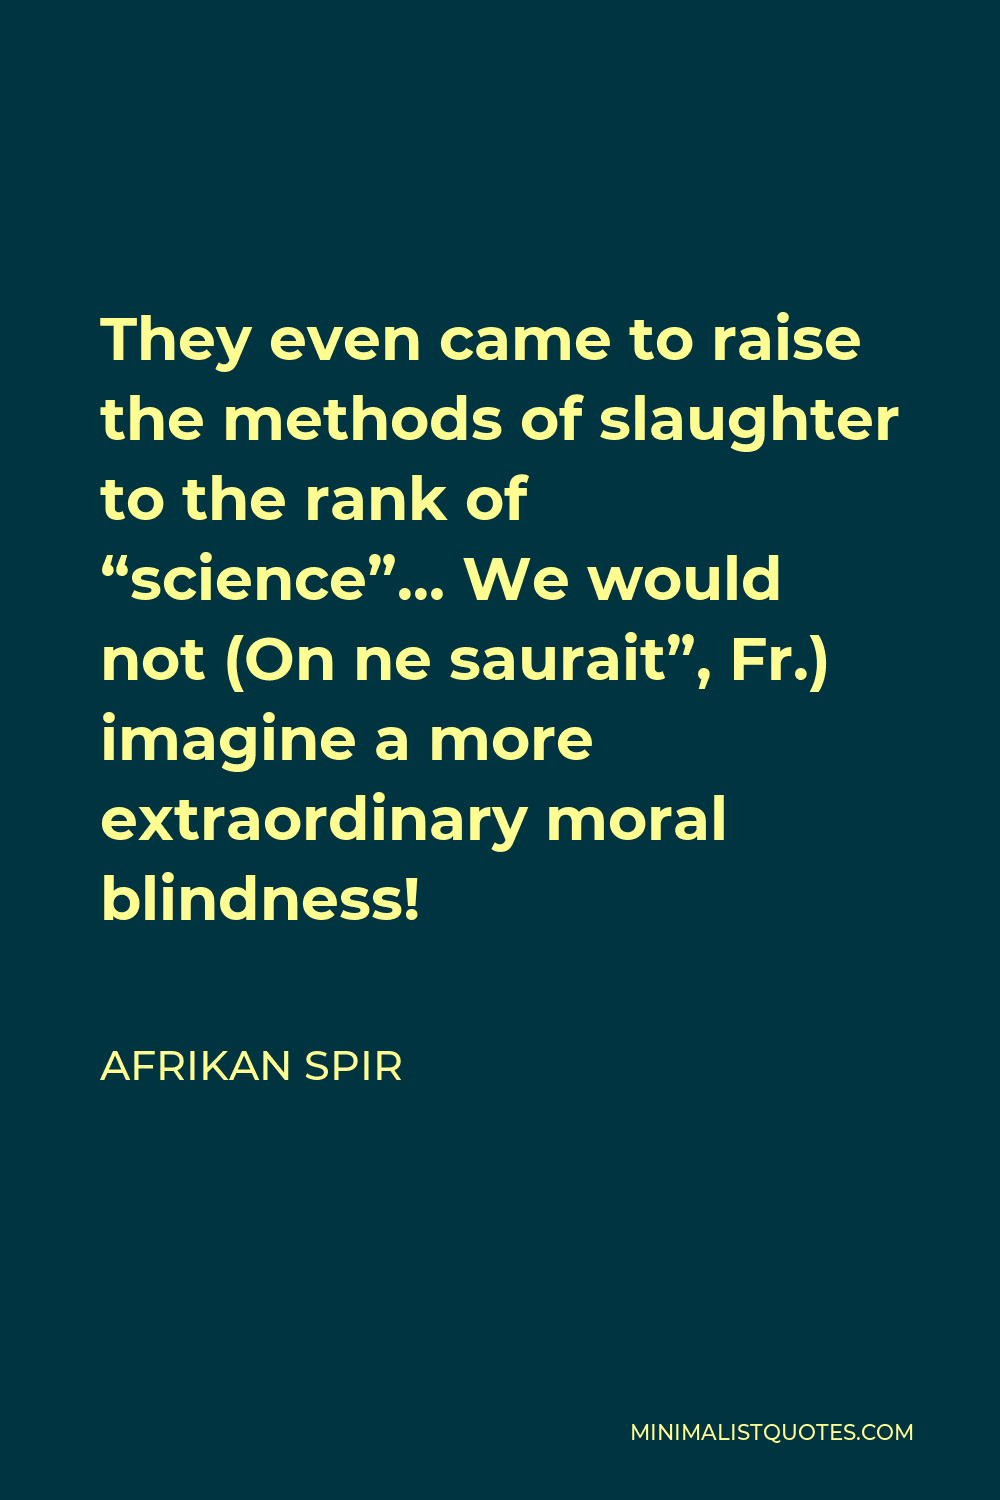 Afrikan Spir Quote - They even came to raise the methods of slaughter to the rank of “science”… We would not (On ne saurait”, Fr.) imagine a more extraordinary moral blindness!